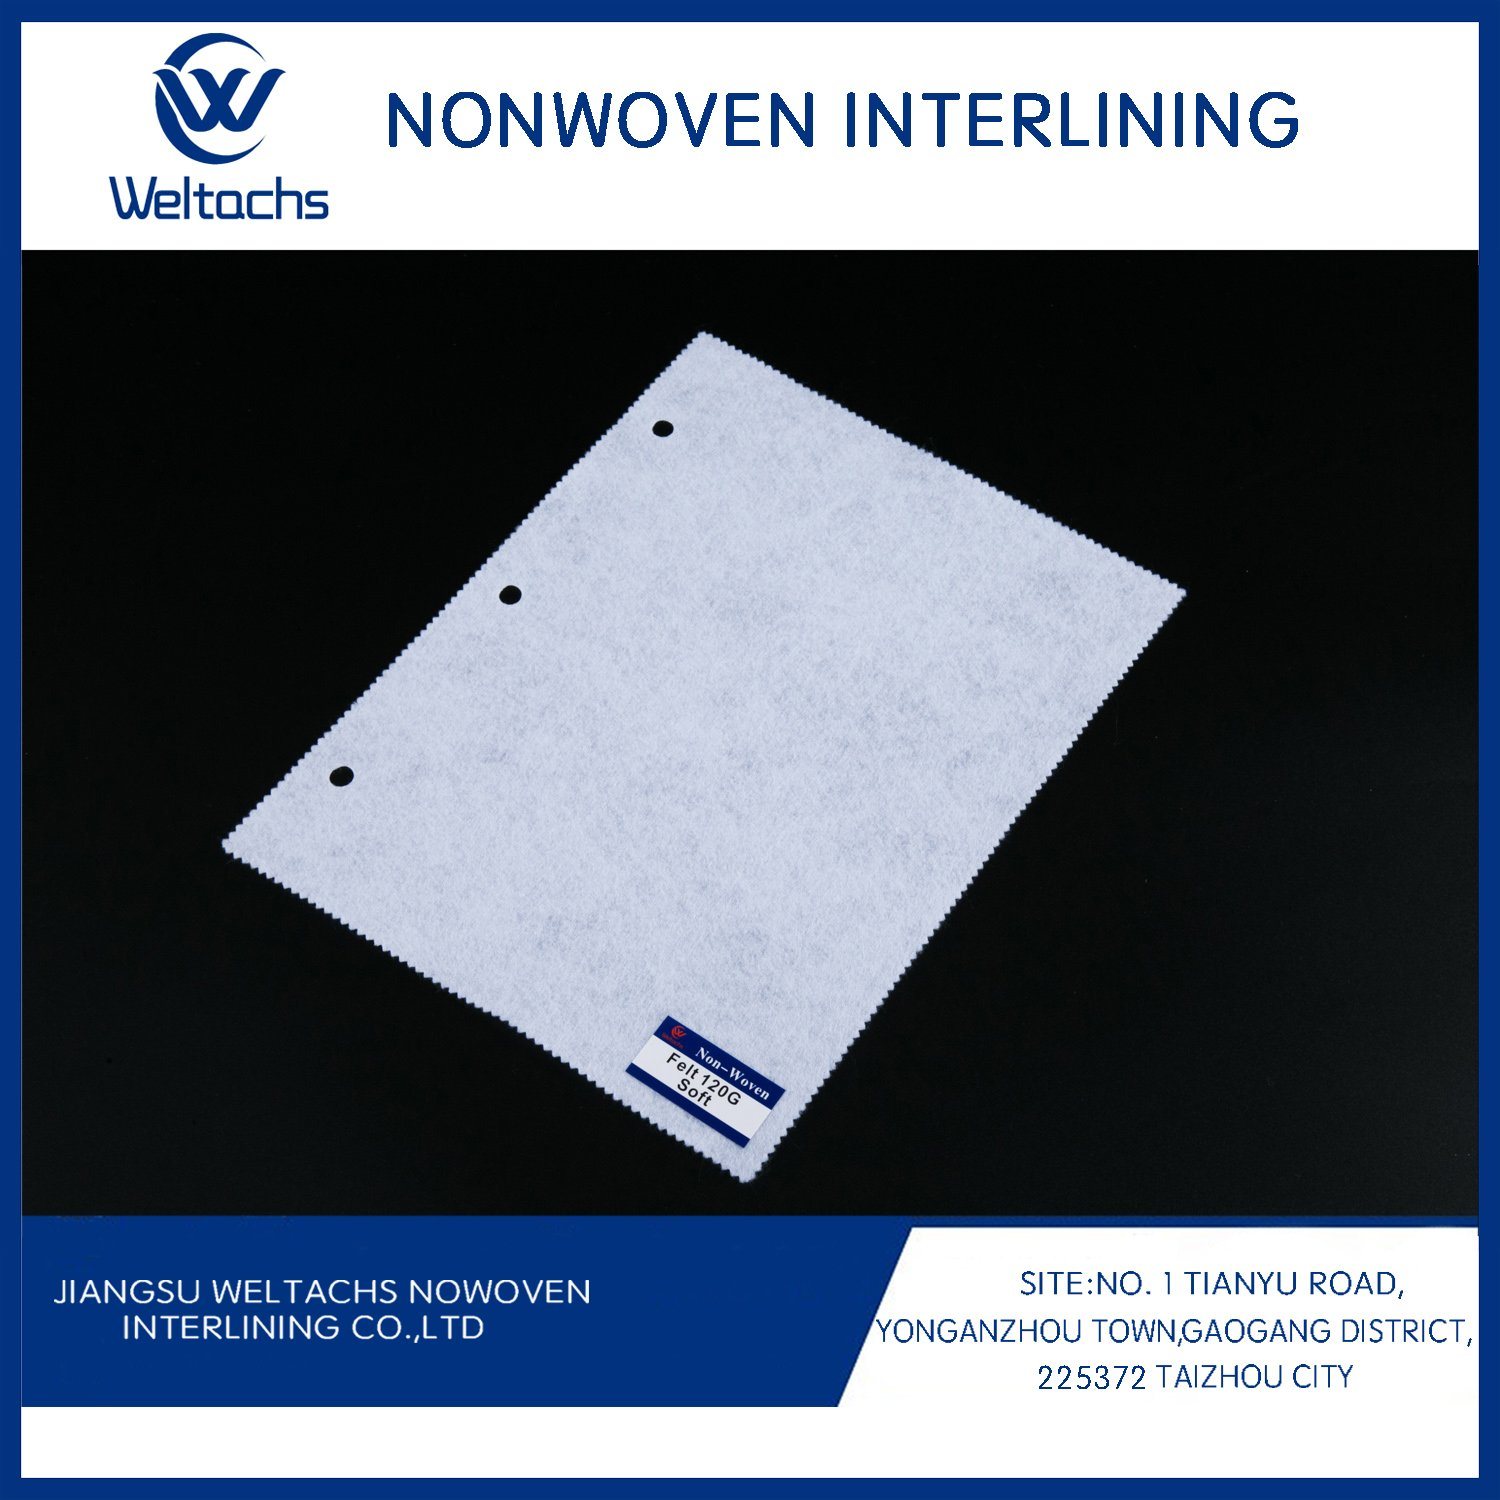 1035hf Gum Stay Non Woven Chemical Bonded Base Fabric and Scatter Fused Embroidery Stabilizer Fusing Interlining